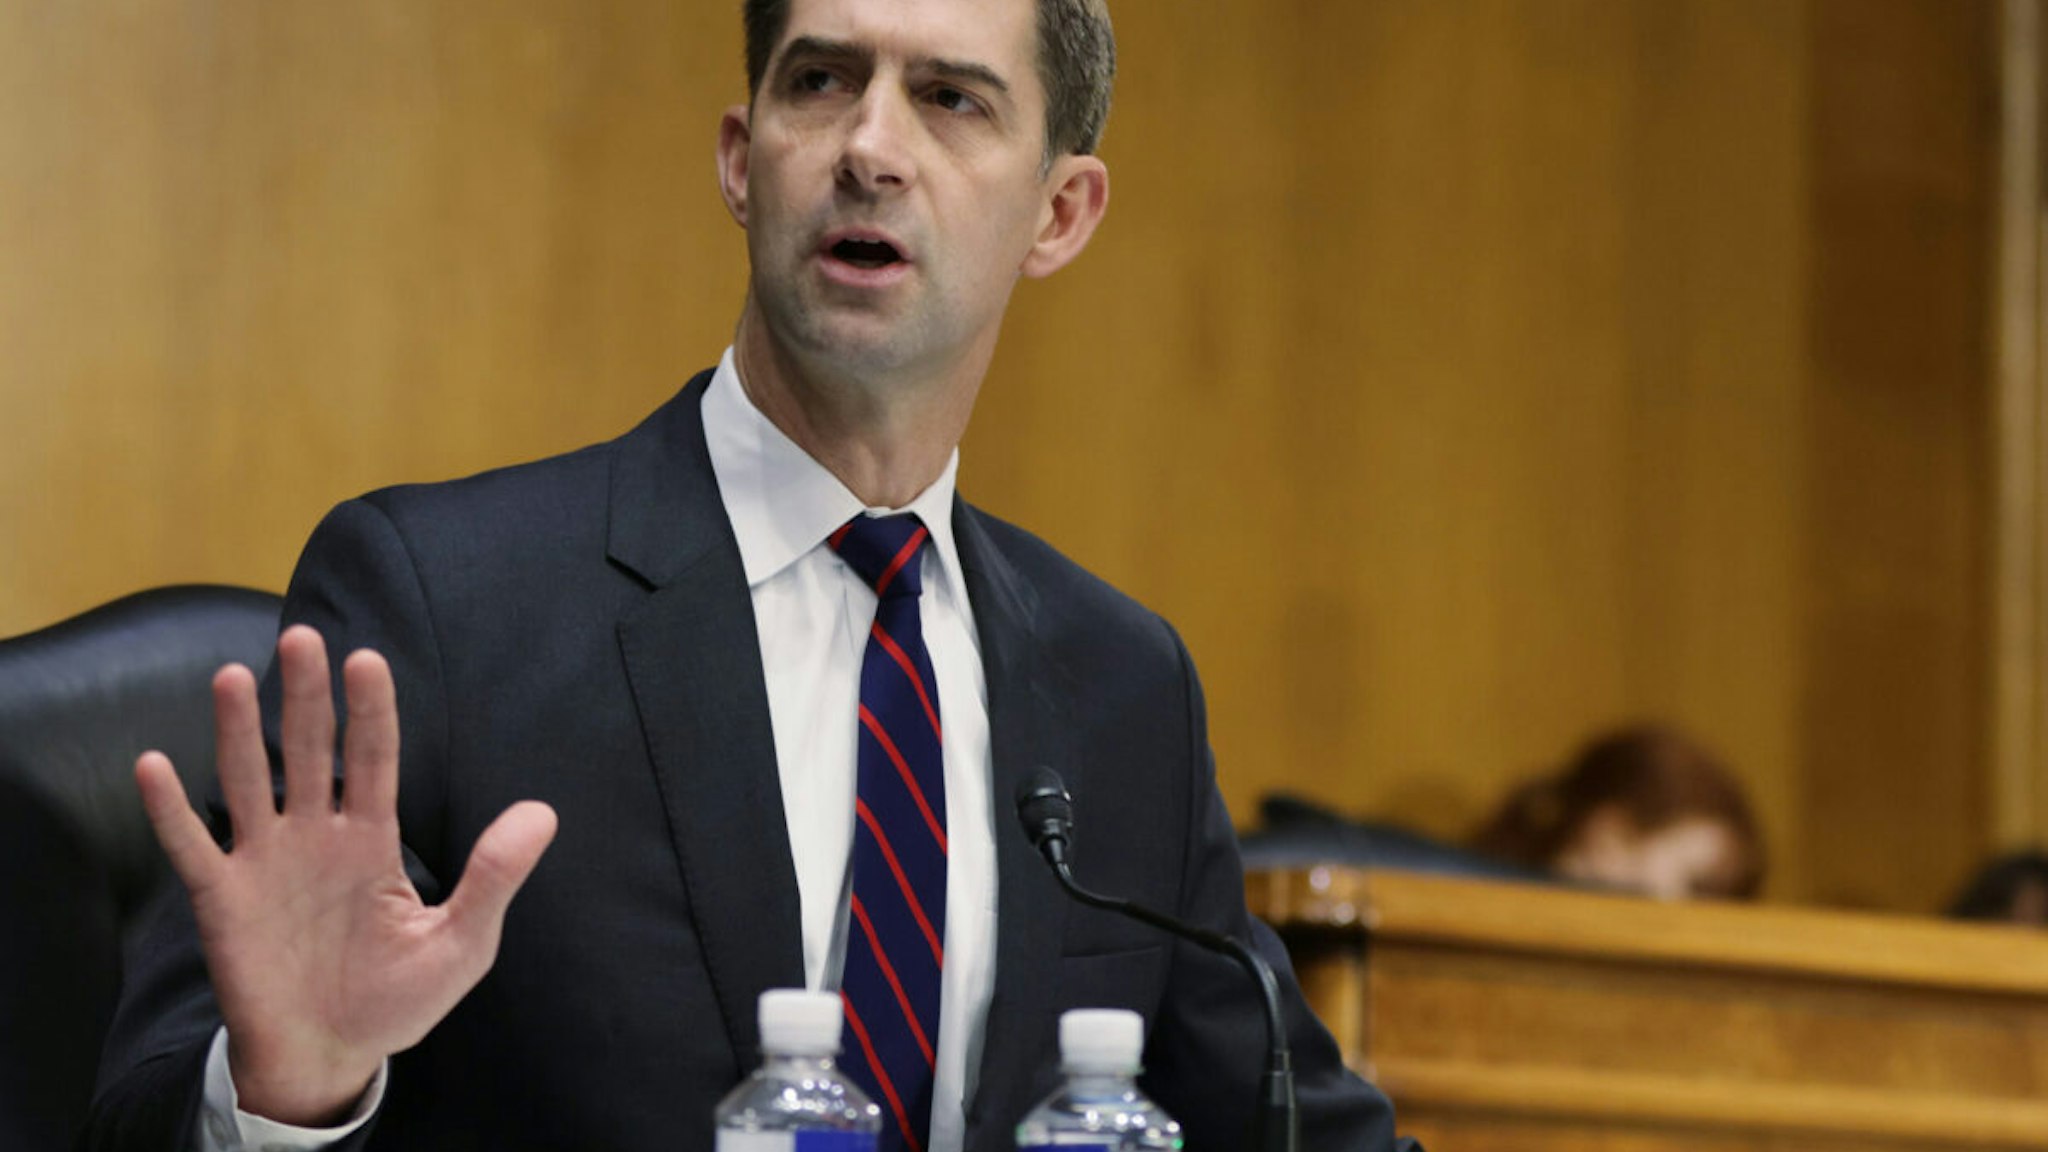 Sen. Tom Cotton (R-AR) questions U.S. Attorney General Merrick Garland as he testifies at a Senate Judiciary Committee hearing about oversight of the Department of Justice on October 27, 2021 in Washington, DC